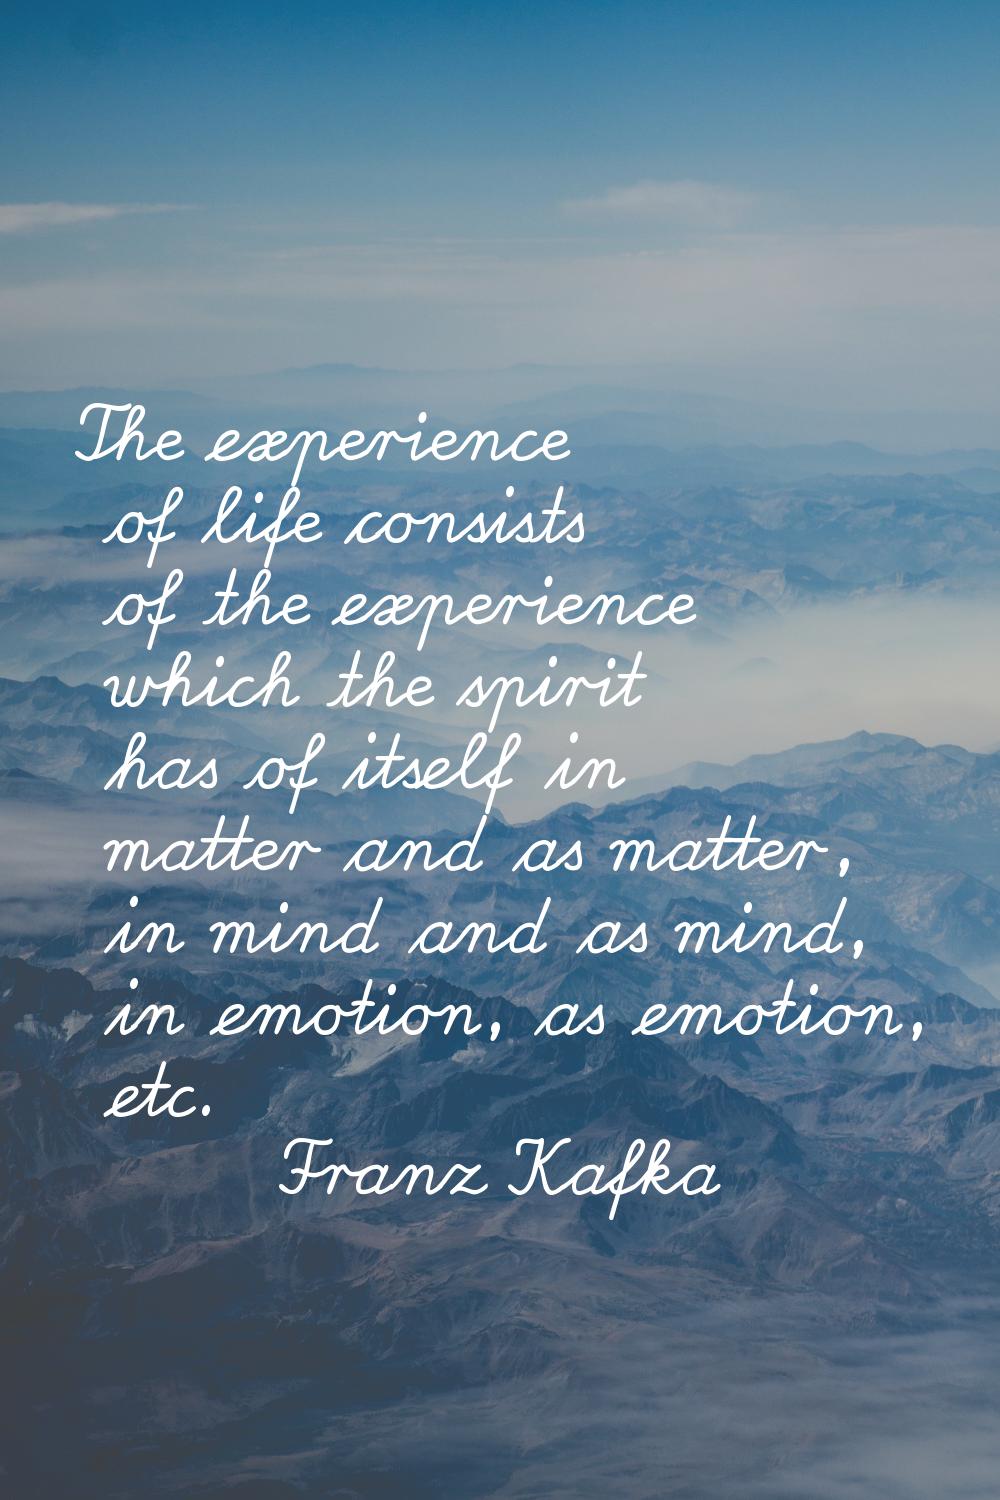 The experience of life consists of the experience which the spirit has of itself in matter and as m